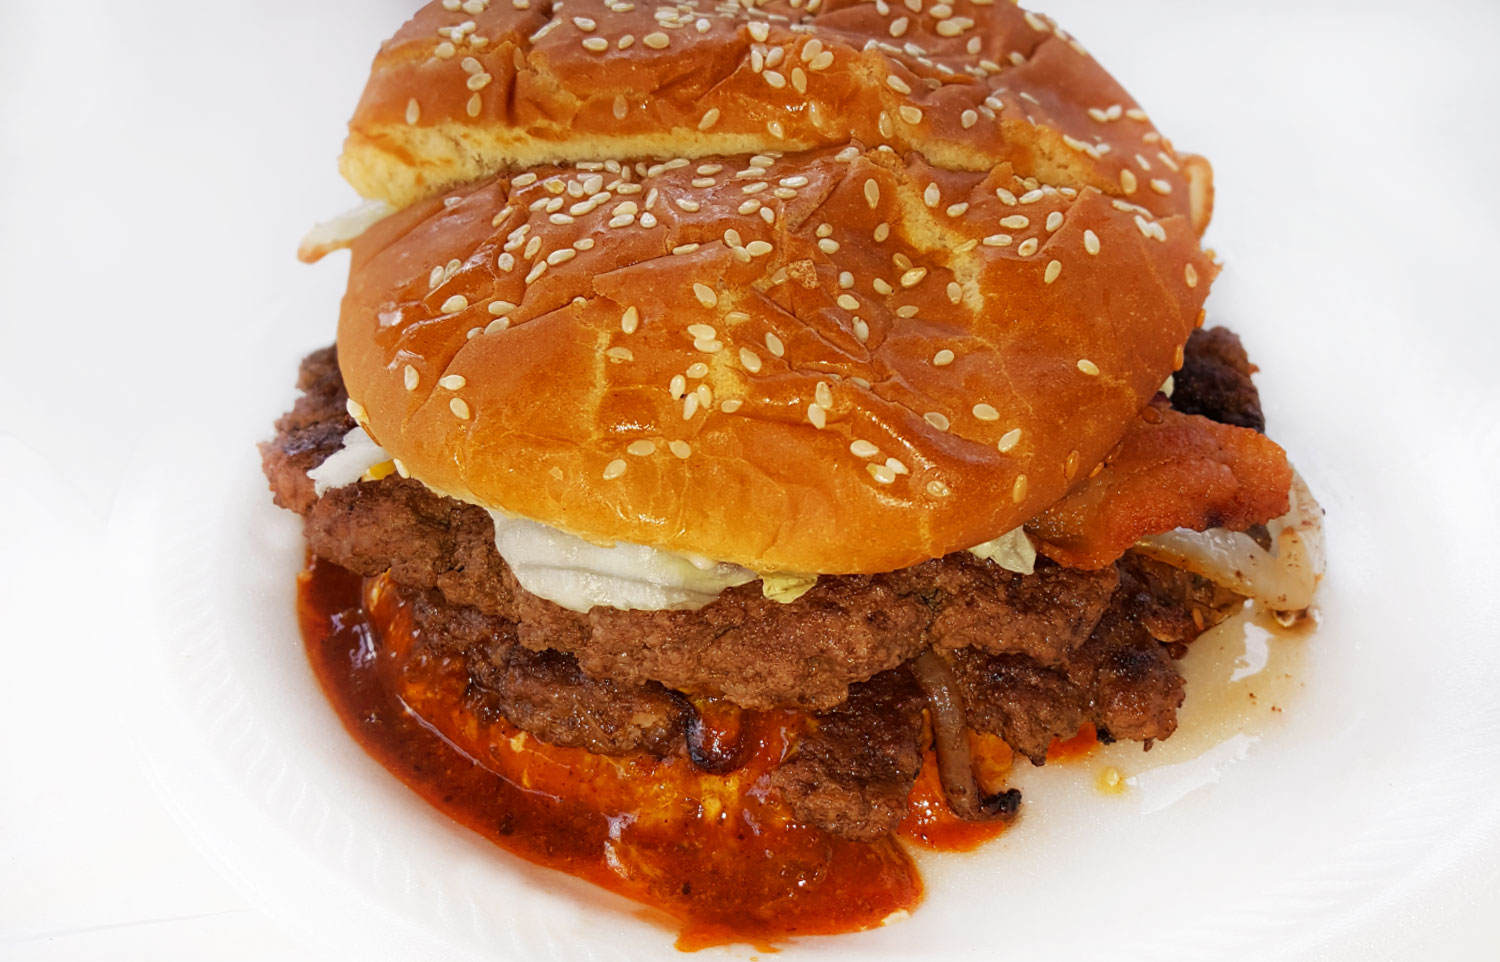 Where to Eat the Best Chili Burger in the World? | TasteAtlas